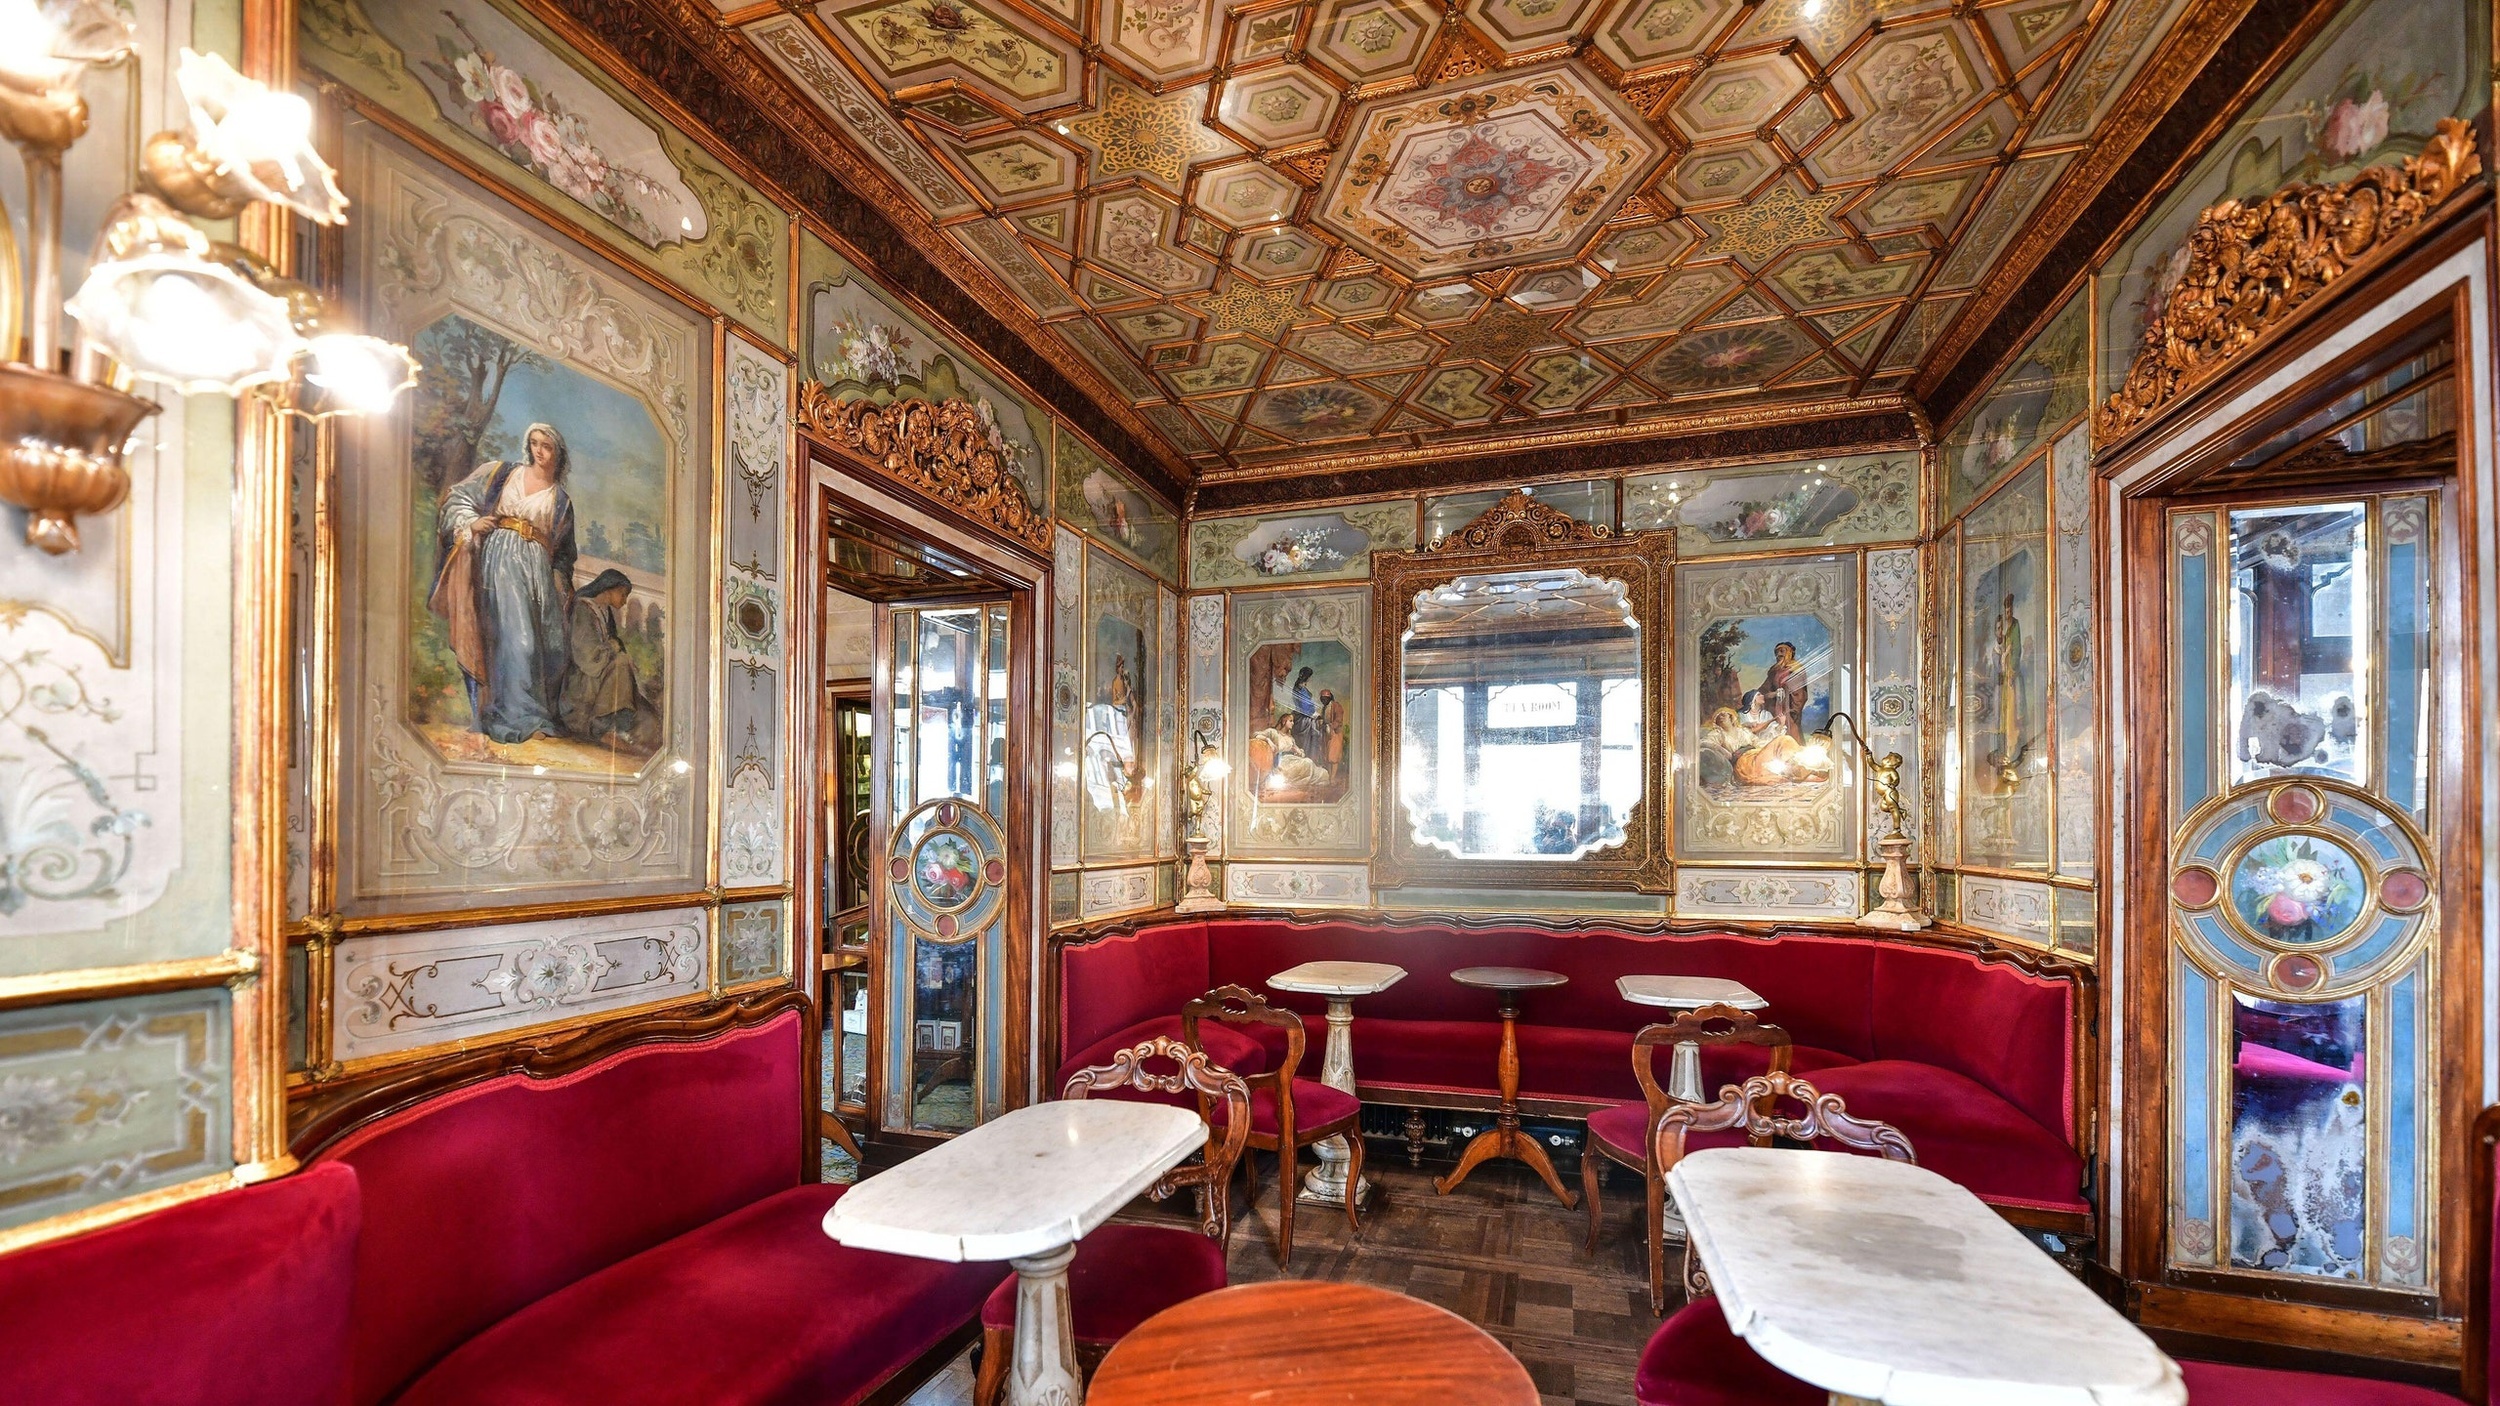 <p>While you're in St. Mark's Square, you'll want to visit Caffe Florian. This iconic Venetian restaurant was once a watering hole for Proust, Dickens, and Casanova, and the decor hasn't changed much over the years. My advice: enjoy an espresso in the same seat Dickens once enjoyed a beer. </p>